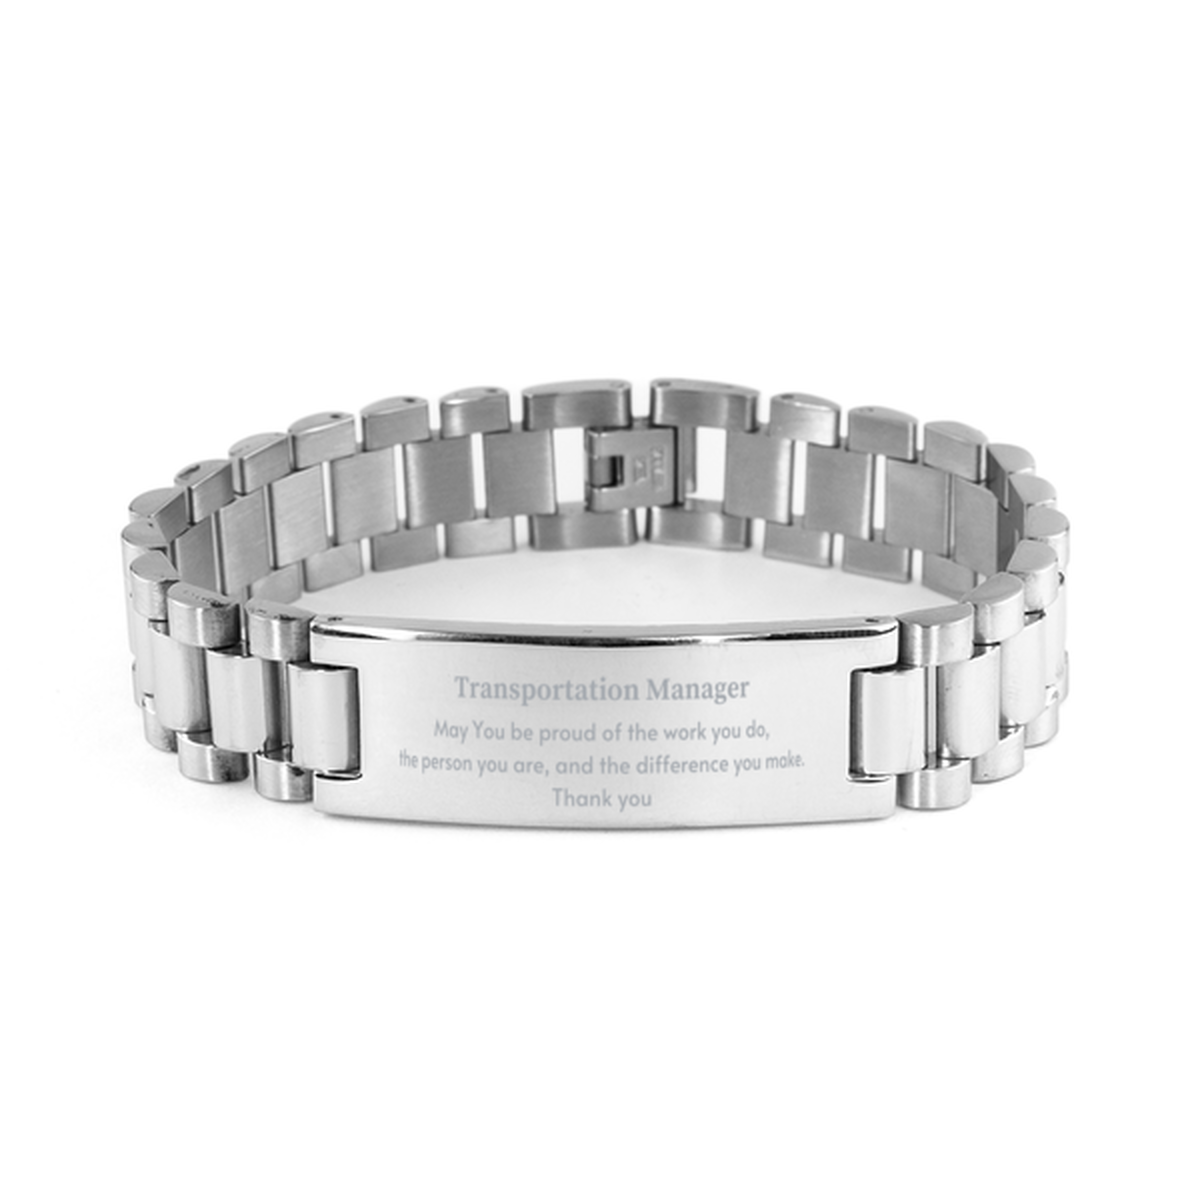 Heartwarming Ladder Stainless Steel Bracelet Retirement Coworkers Gifts for Transportation Manager, Transportation Manager May You be proud of the work you do, the person you are Gifts for Boss Men Women Friends